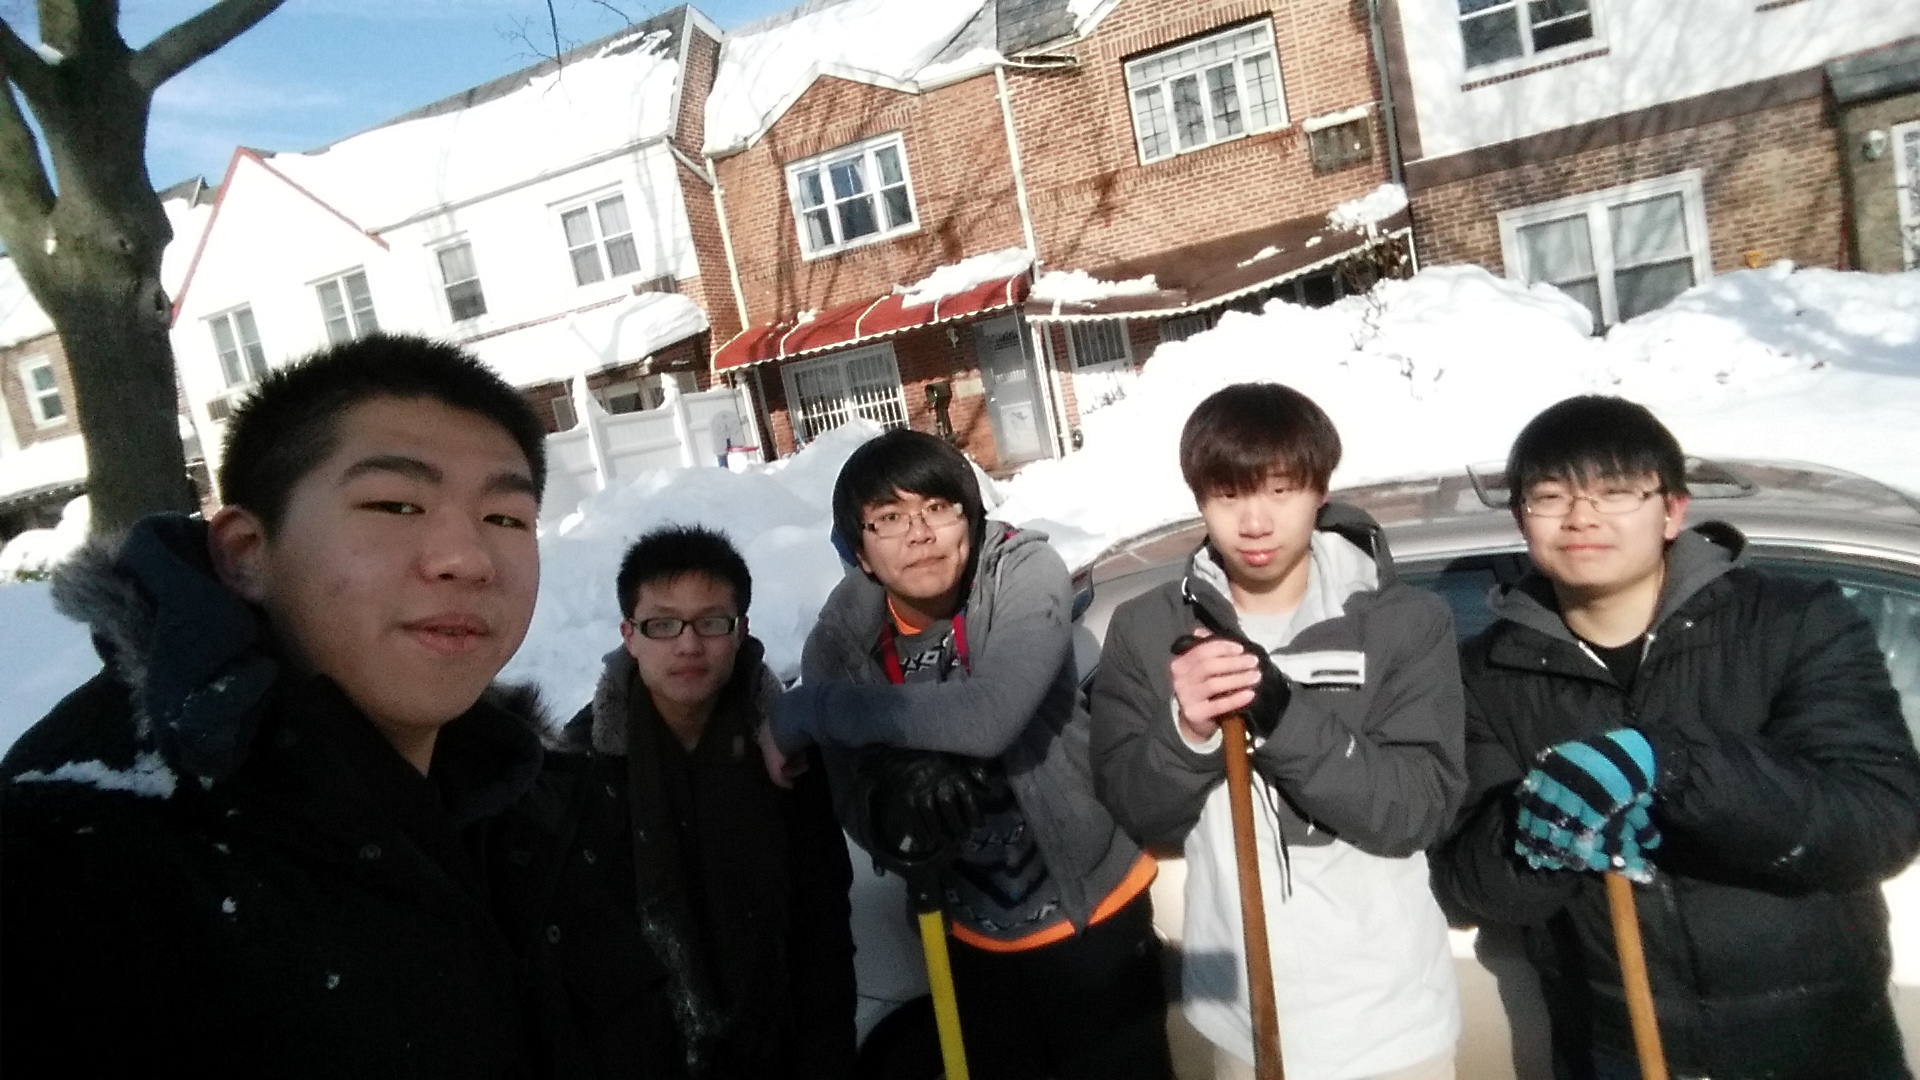 Many thanks to our East-West students Kern Hui, Jun Hao, Hai Lin, Jason Shi and Sen Xu for volunteering to shovel snow for the seniors in our community.